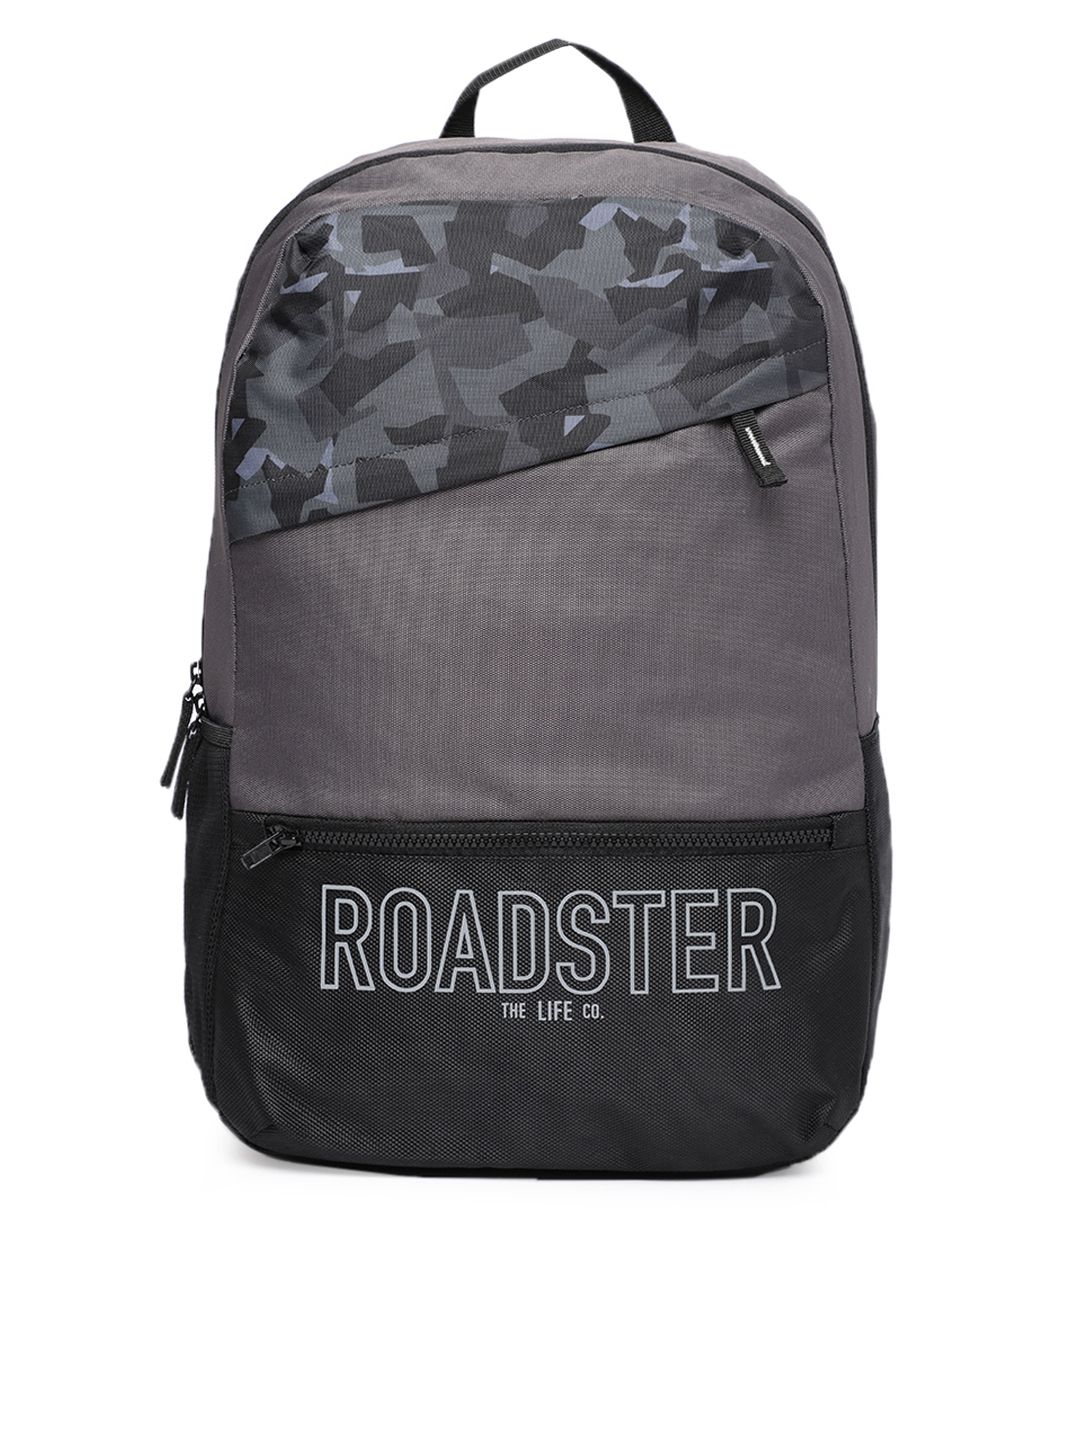 Roadster Unisex Grey Graphic Backpack Price in India